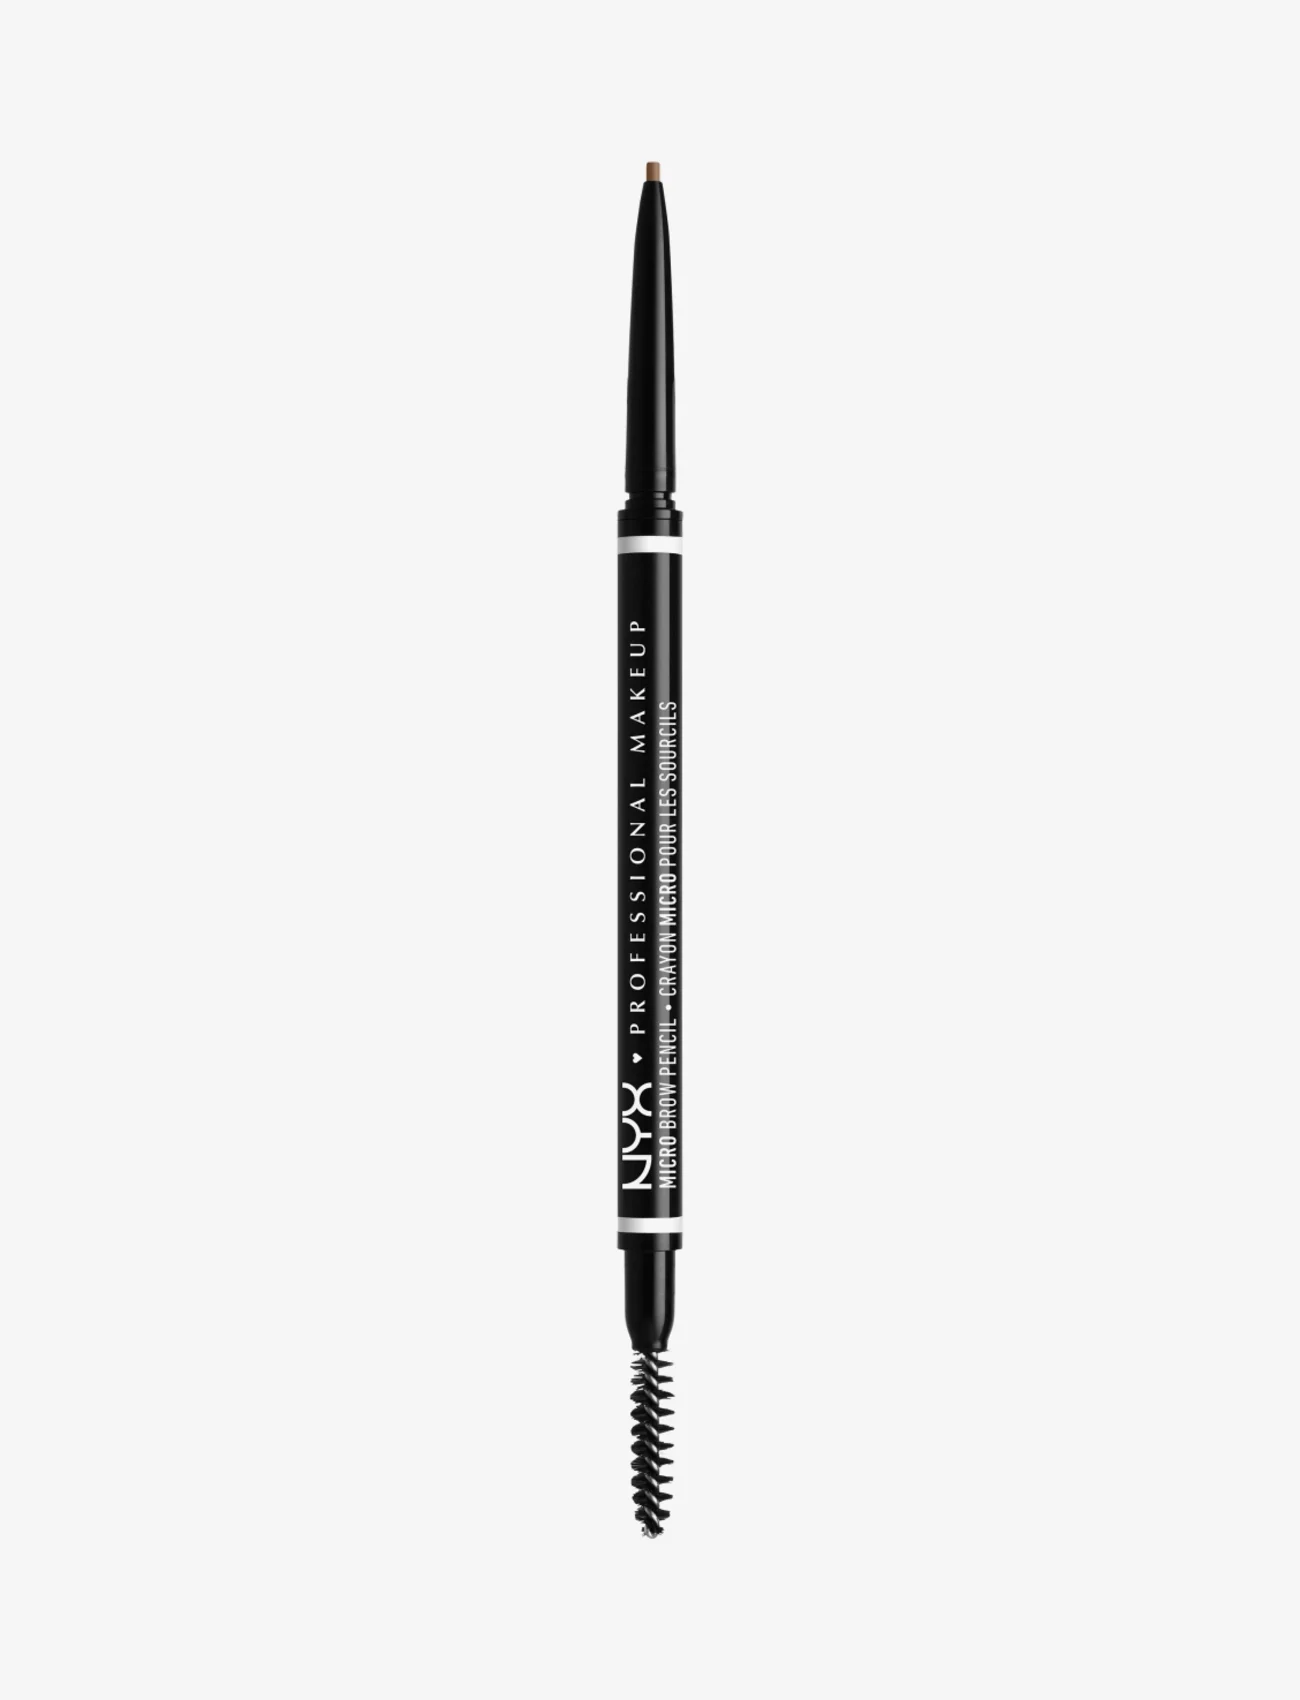 NYX Professional Makeup - NYX Professional Makeup Micro Brow 01 Taupe brow pen 0,1g - Ögonbrynspenna - taupe - 0